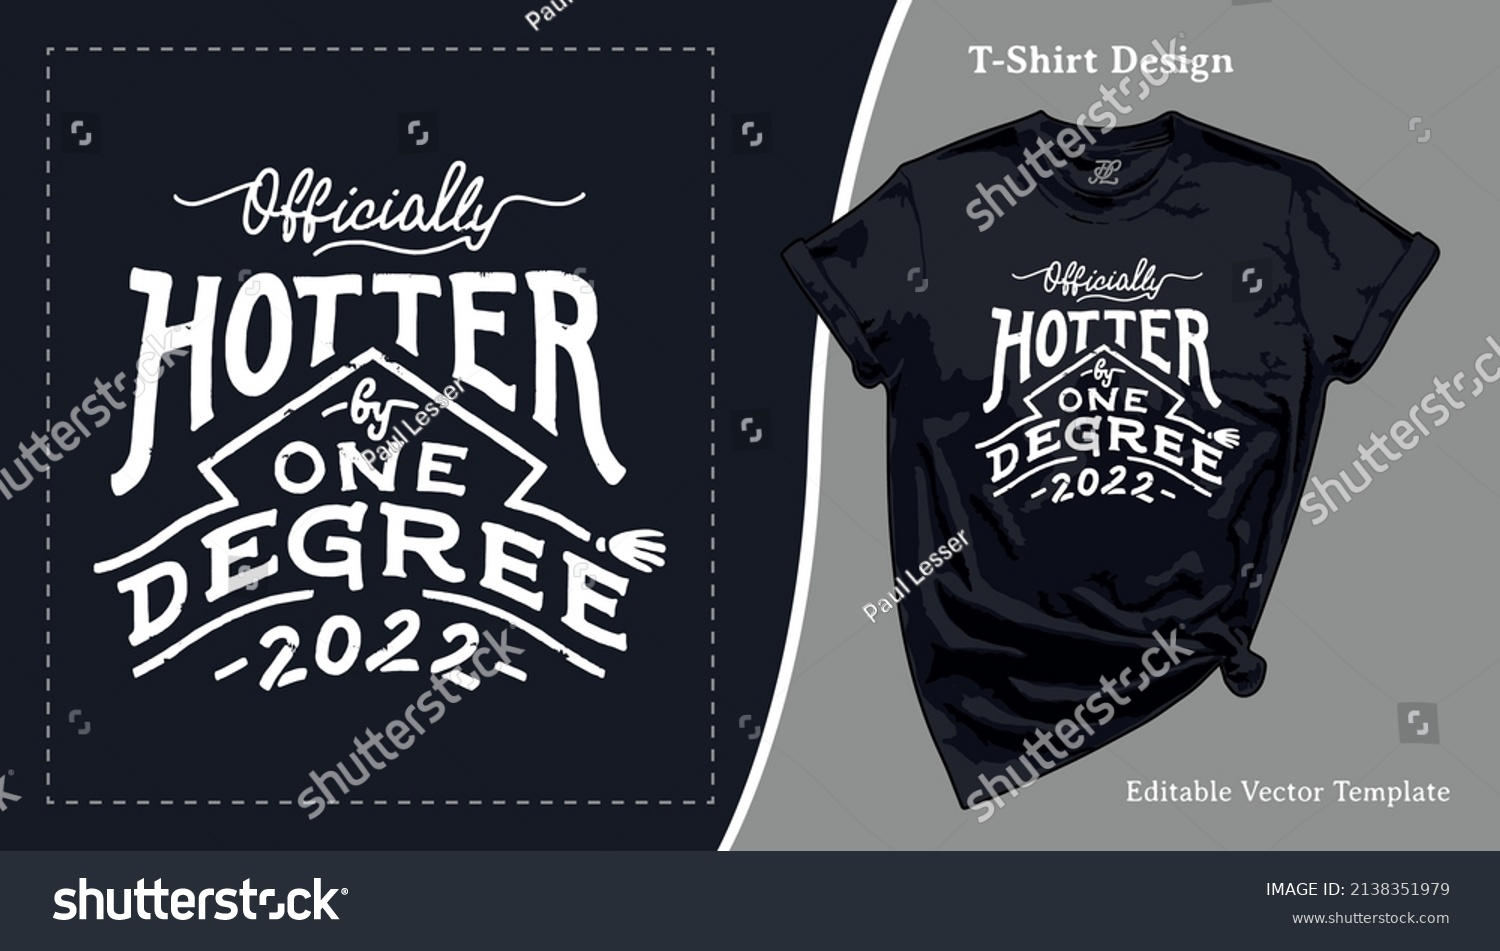 SVG of Officially Hotter by One Degree 2022 T-Shirt Design. Graduate of 2022 T shirt Template with a Hand drawn Saying for POD Senior Tee, Apparel, Clothing, SVG and Screen Print. Phd Graduation Gift svg